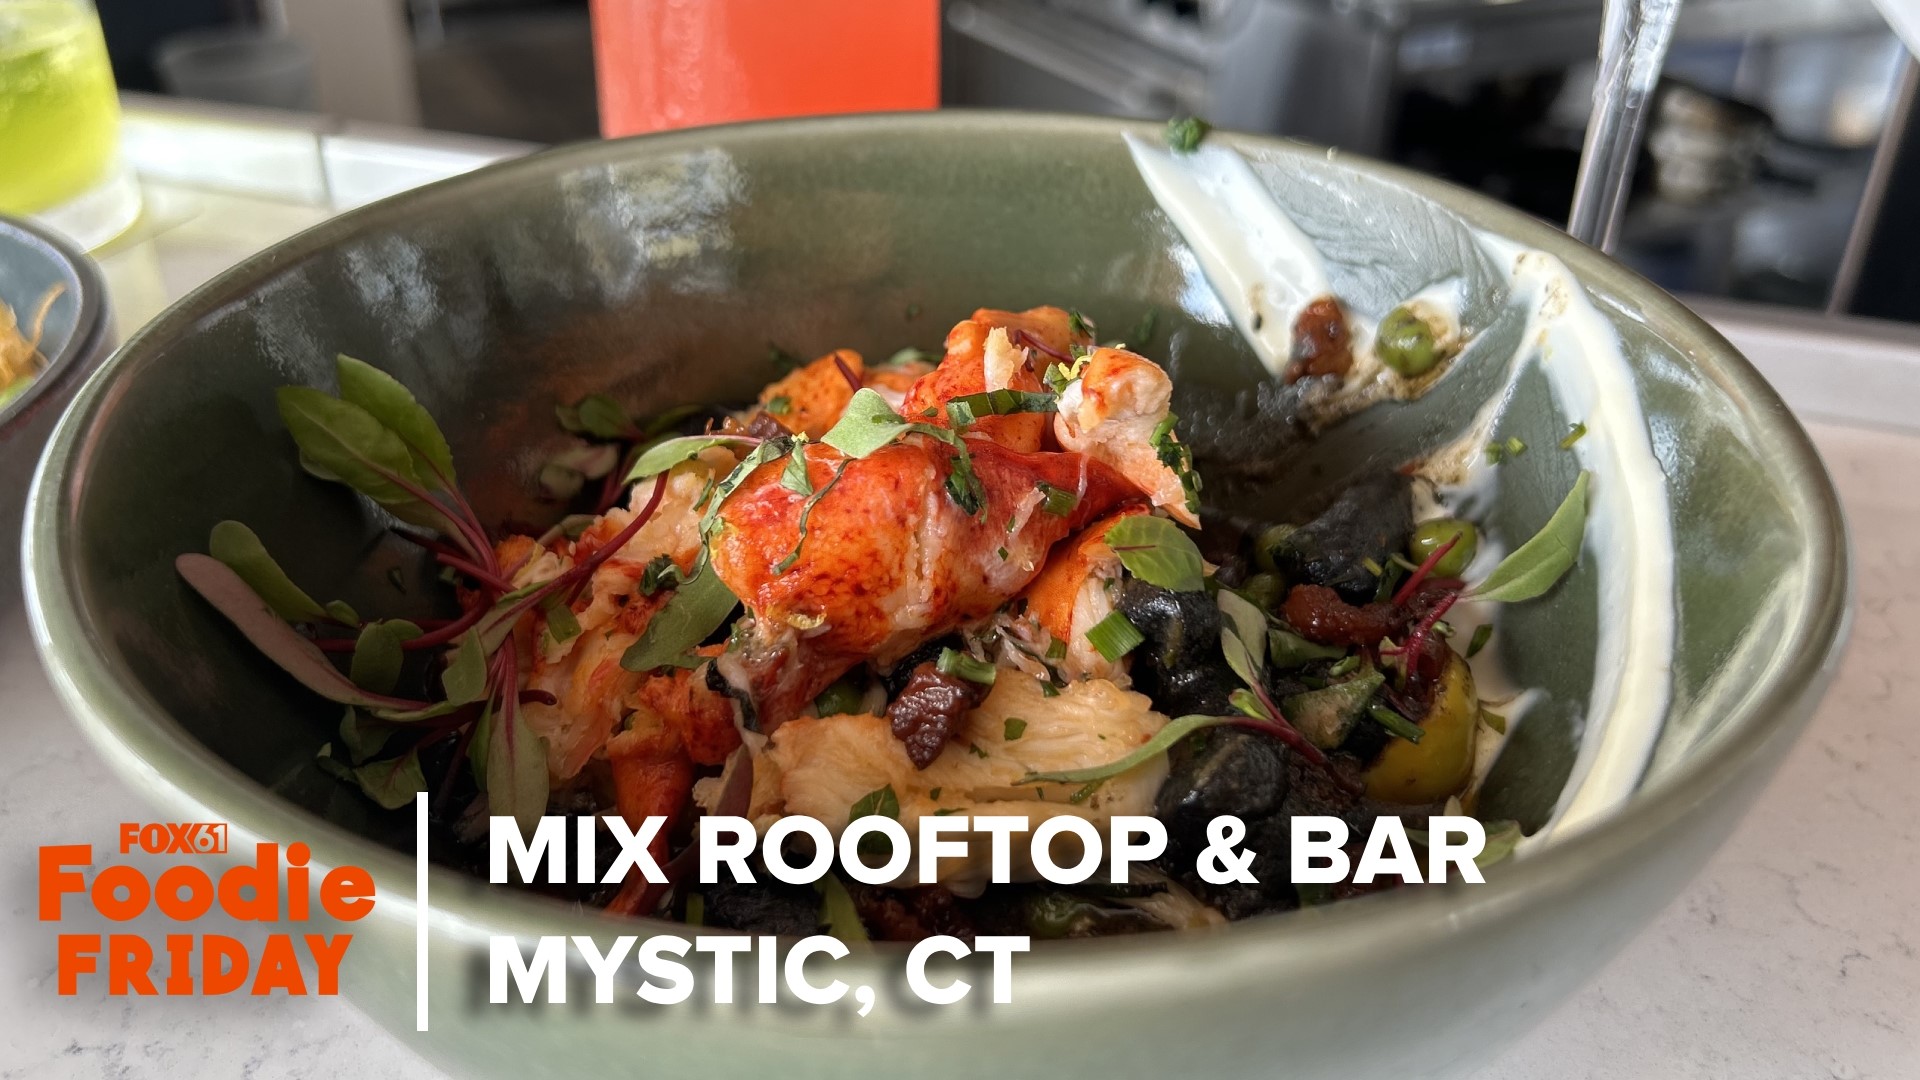 FOX61's Matt Scott visits  Mix Rooftop & Bar at Sift Bake Shop in Mystic for Foodie Friday.